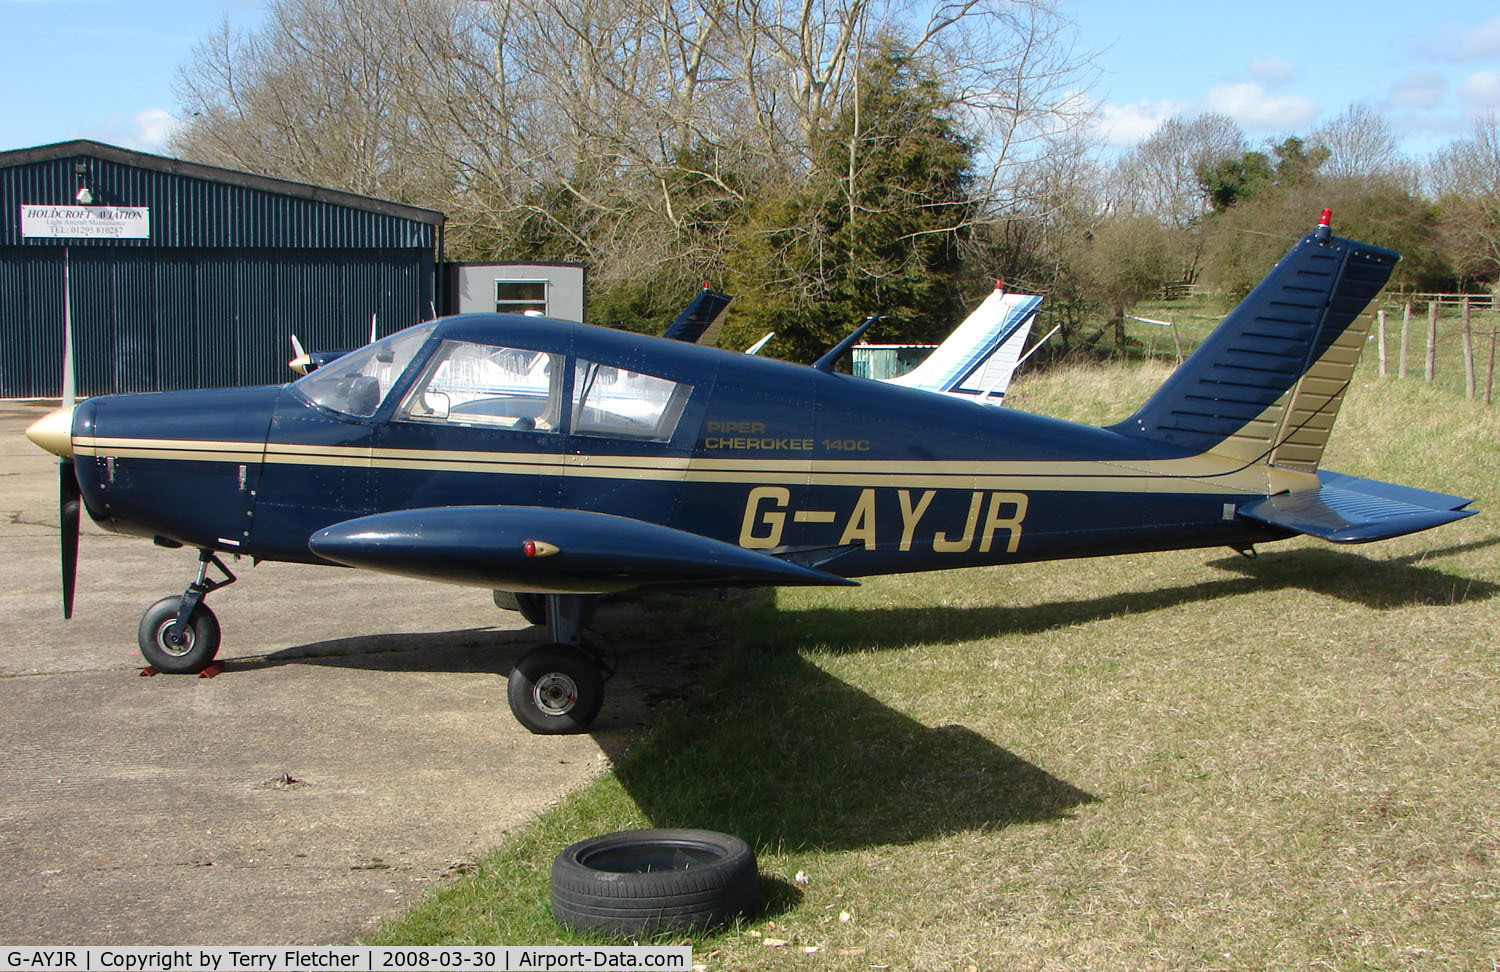 G-AYJR, 1970 Piper PA-28-140 Cherokee C/N 28-26694, Based aircraft at the quaintly named Hinton-in-the-Hedges airfield